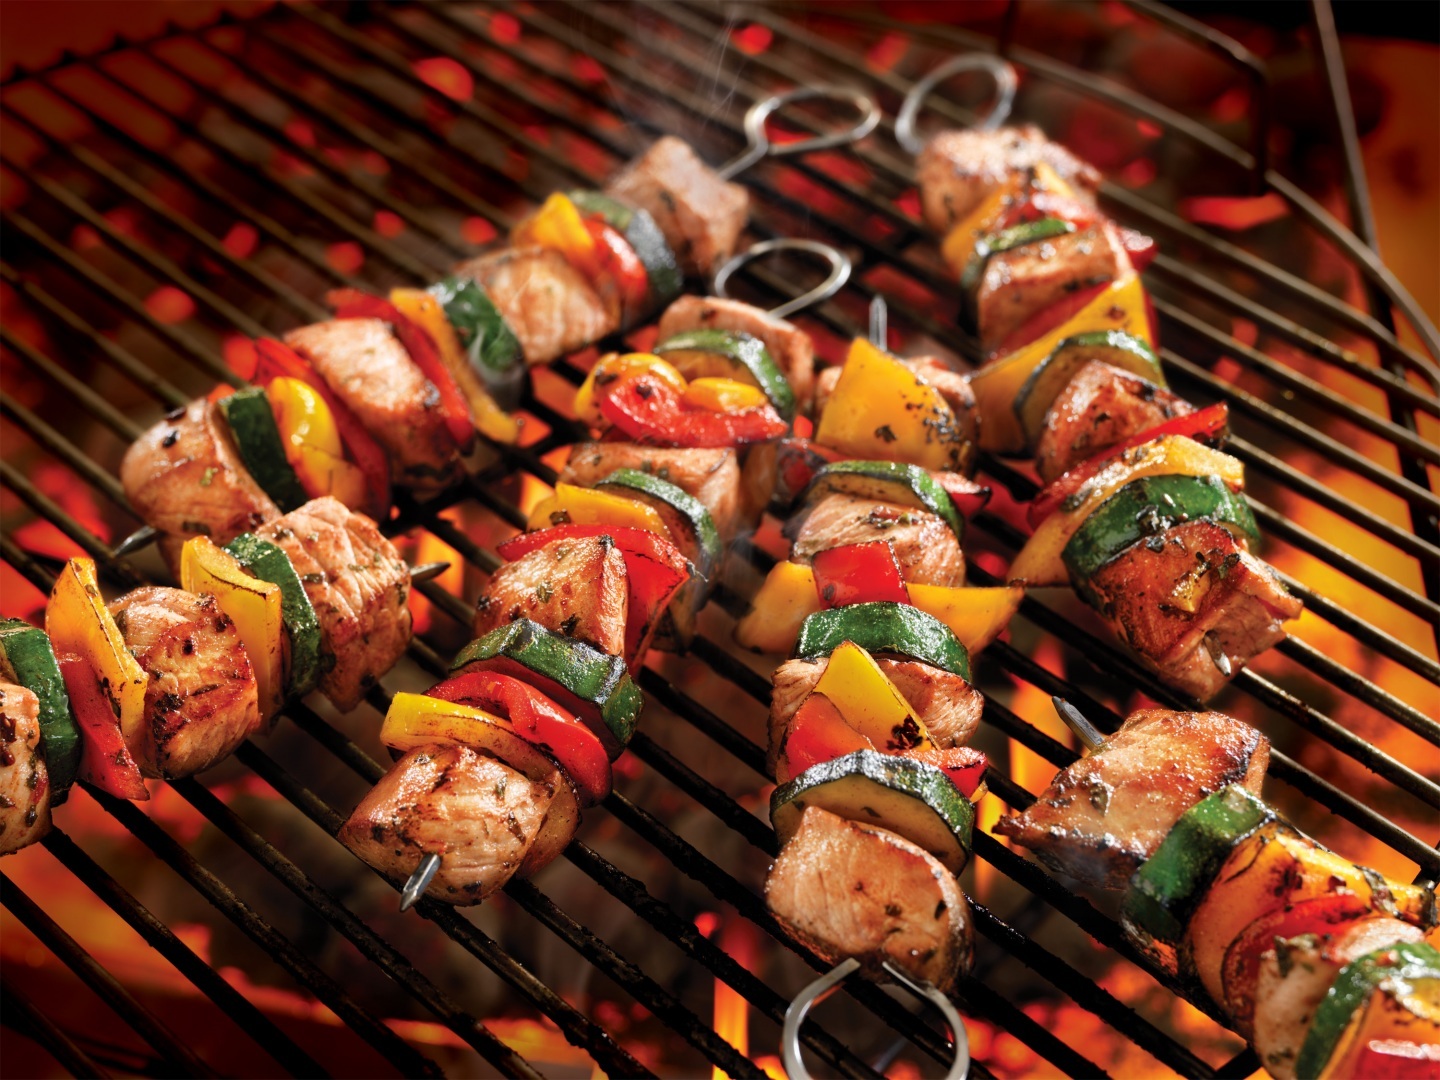 Kabobs Healthy Bbq Wallpaper Photo Background Image